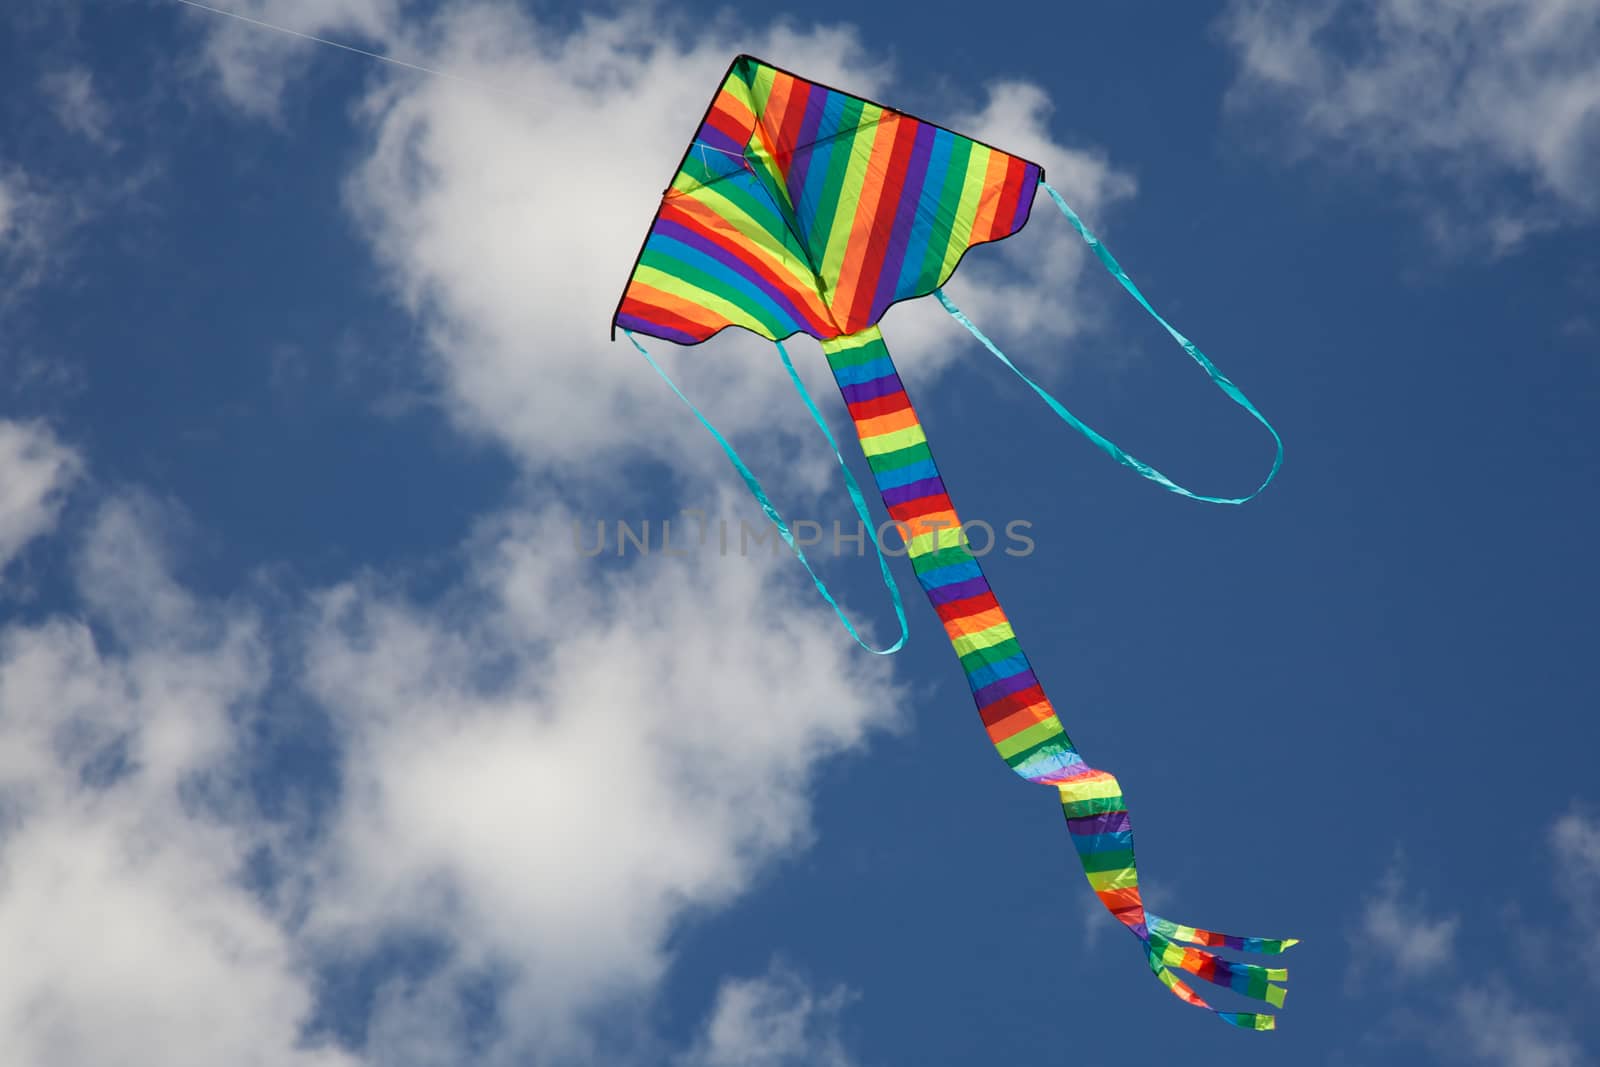 Kite Flying Bright Colours by instinia